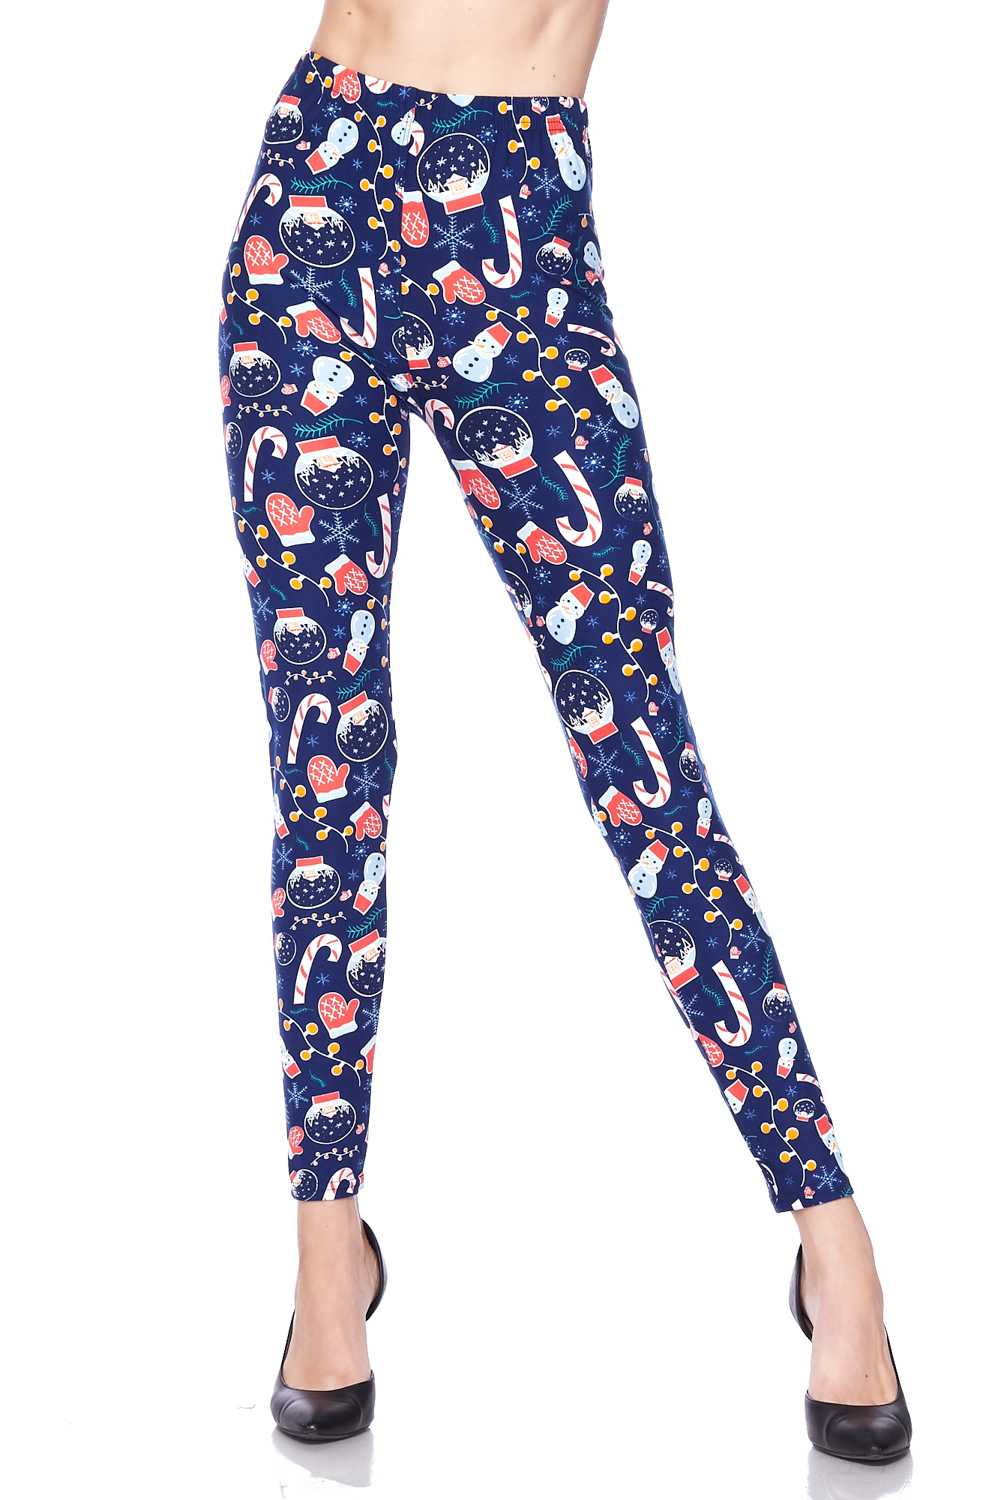 Warm on a Cold Night Print Brushed Leggings - 5